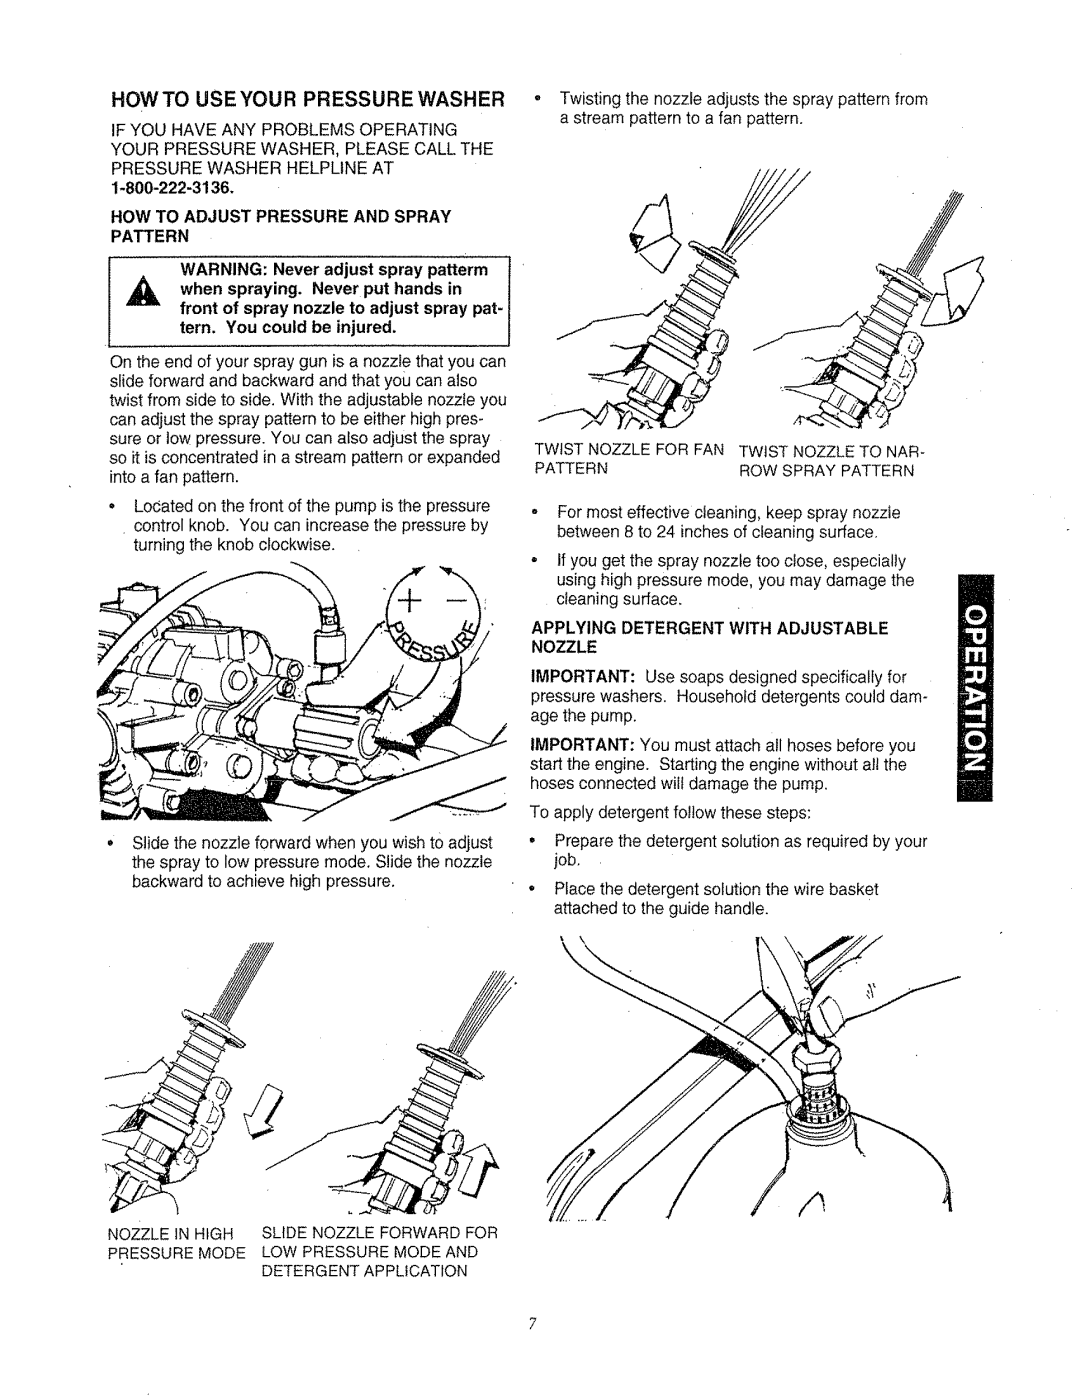 Craftsman 580.763 owner manual How To Use Your Pressure Washer, How To Adjust Pressure And Spray Pattern 